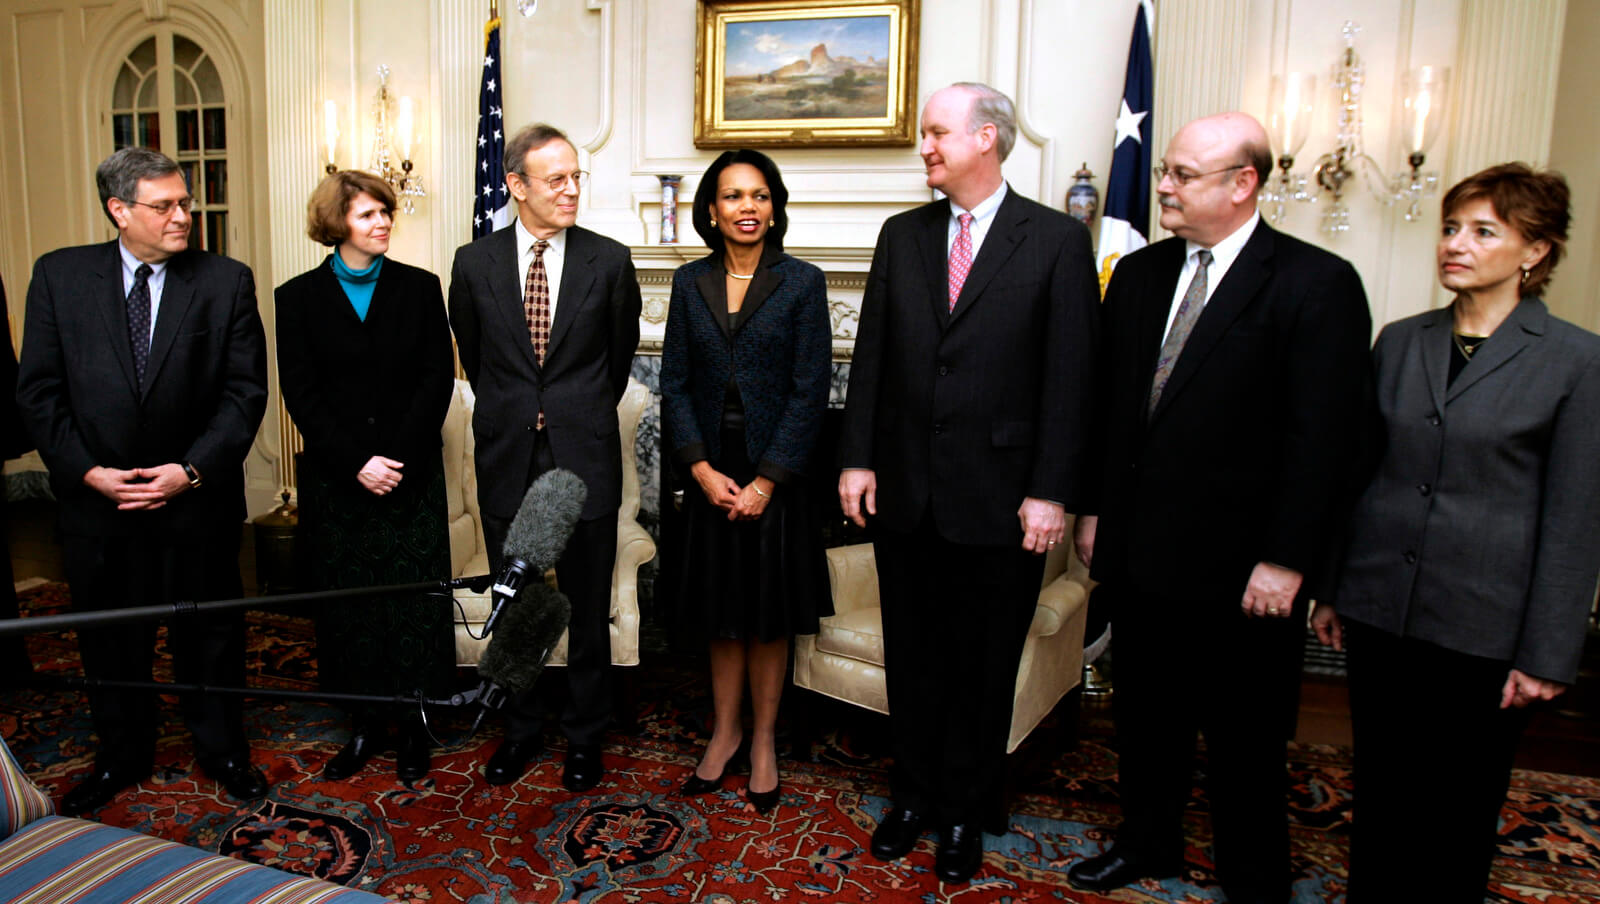 Condoleezza Rice, fourth from left, accompanied by participants from Non-governmental organizations, speaks to reporters at the State Department in Washington, Wednesday, Jan. 31, 2007. From left are, Ken Wollack, National Democratic Institute; Jennifer Windsor, Freedom House; Carl Gershman, National Endowment for Democracy; Rice; Lorne Craner, International Republican Institute; John Sullivan, Center for International Private Enterprise; and Ellie Larson, Solidarity Center. Manuel Balce Ceneta | AP